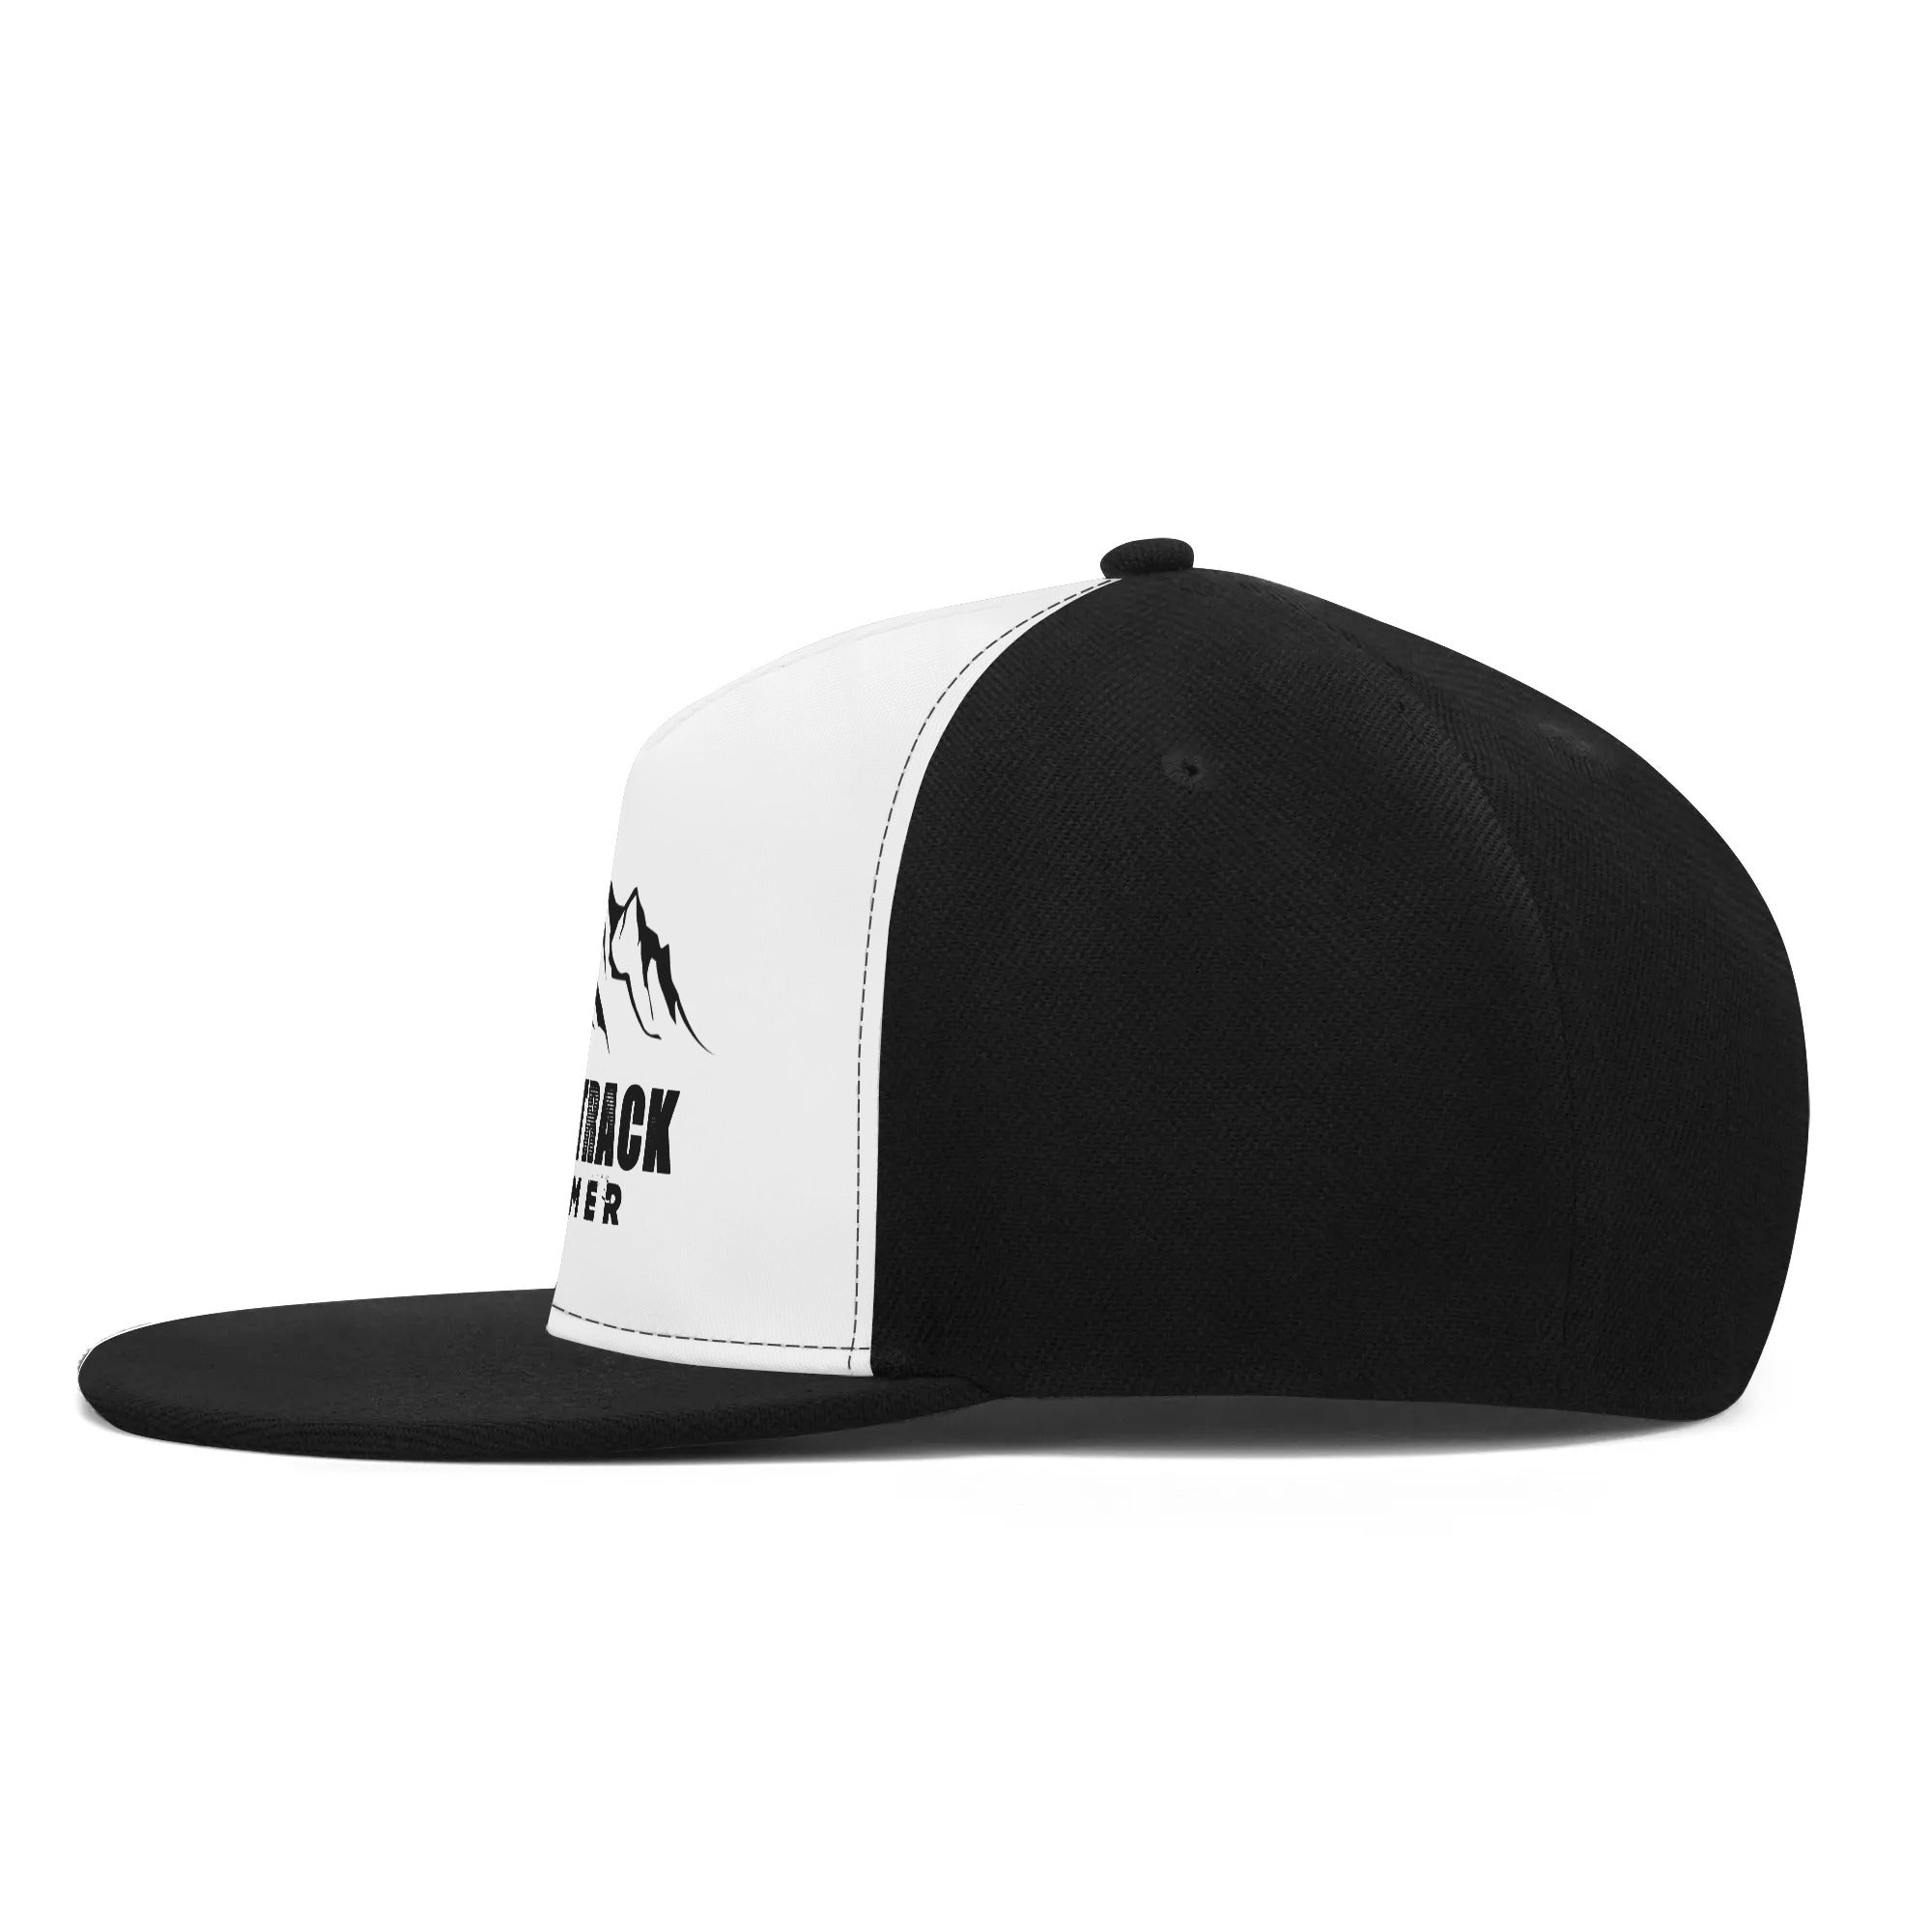 a black and white hat with a mountain scene on it